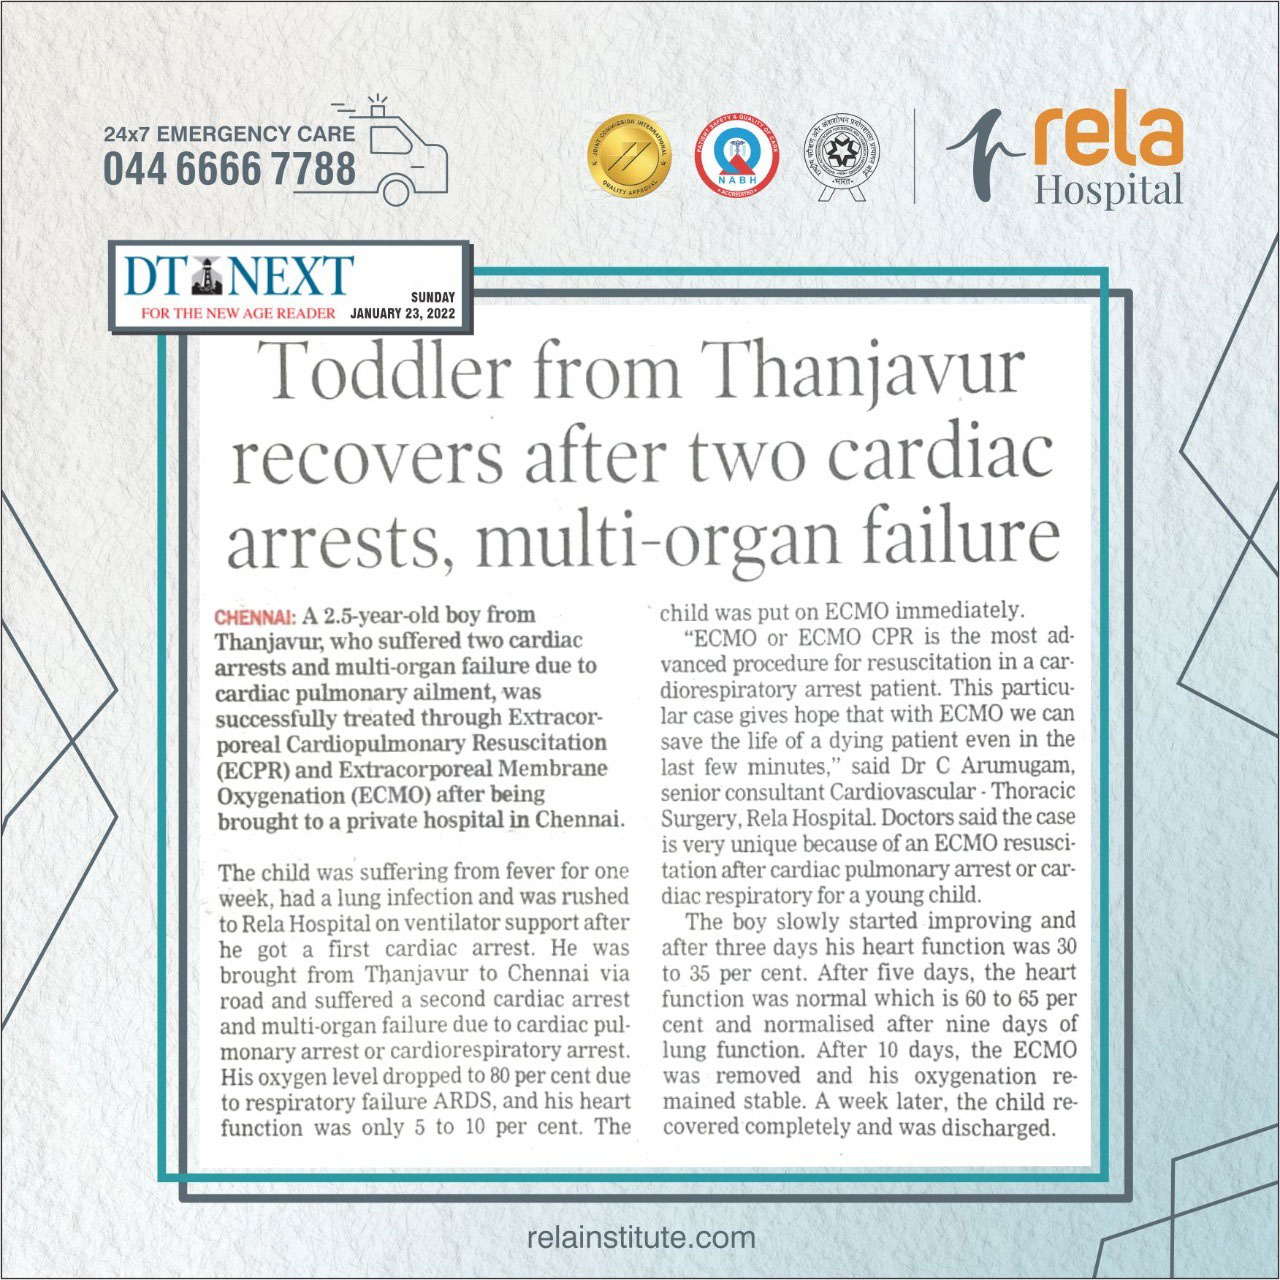 Rela Hospital Saves The Life Of A Two-And-A-Half-Year-Old Child By Successfully Performing A Rare ECMO CPR Procedure